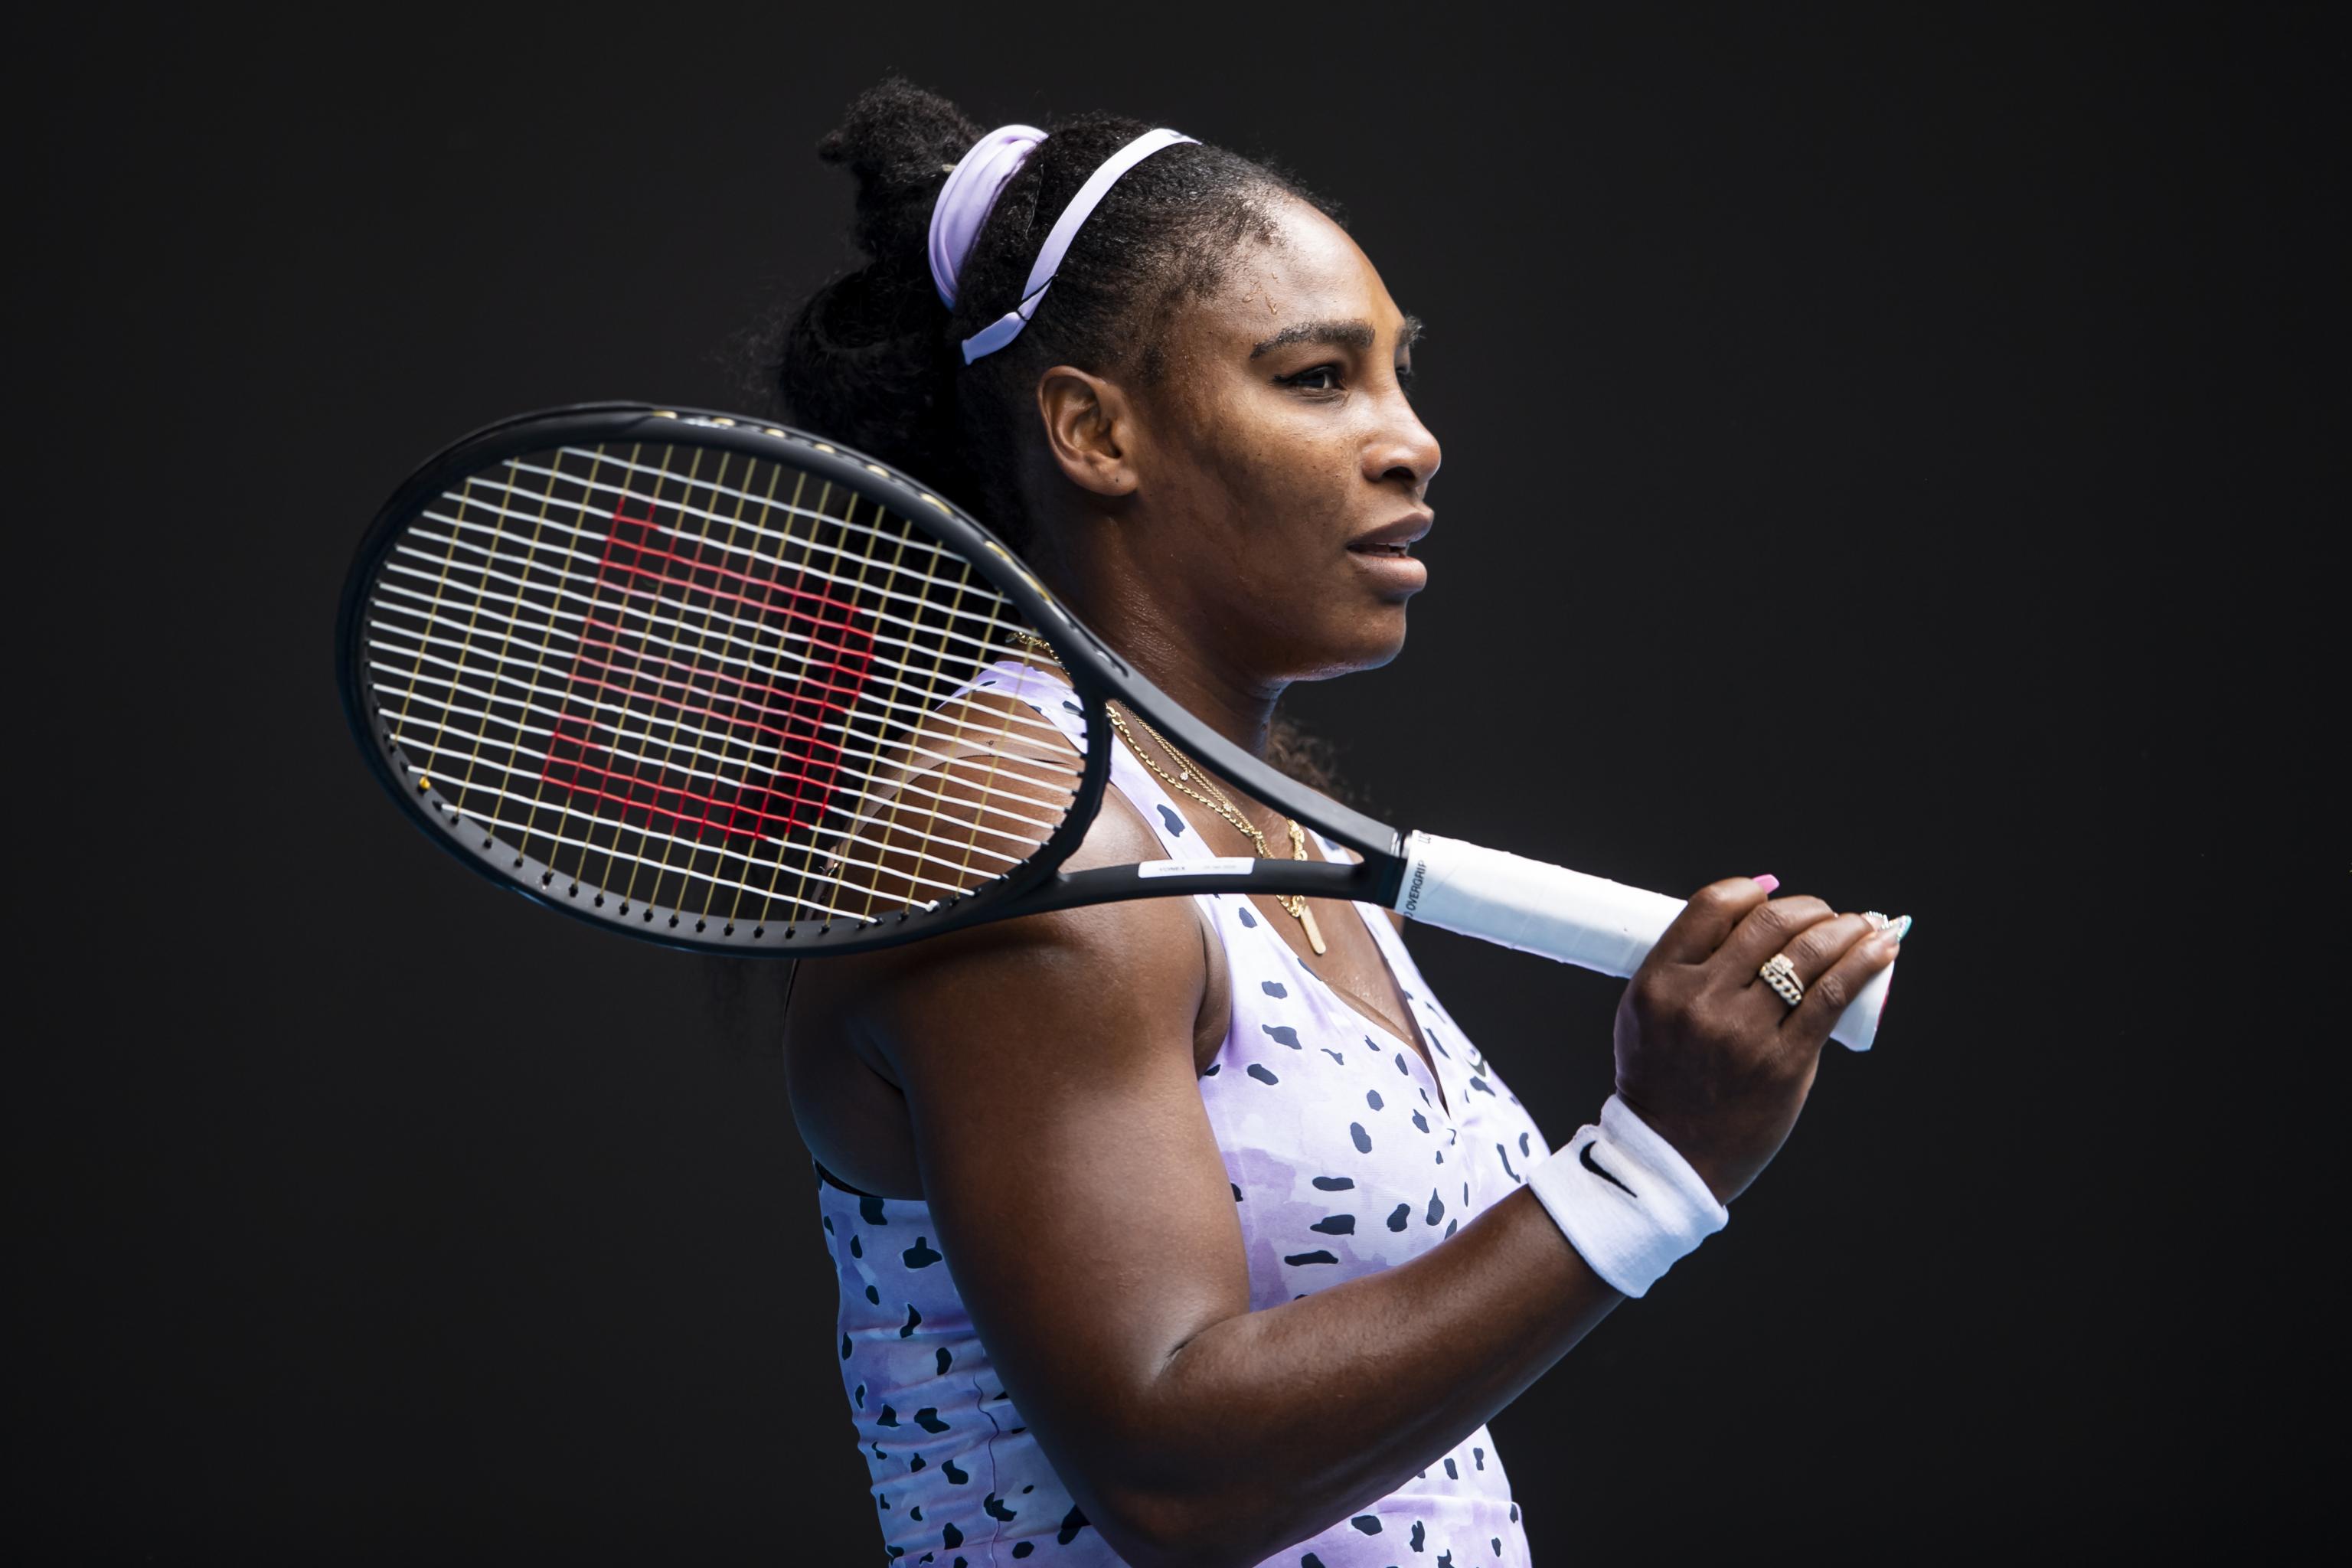 Open 2020 Results: Scores, Stats from Friday Singles Bracket | Bleacher Report | Latest News, Videos and Highlights